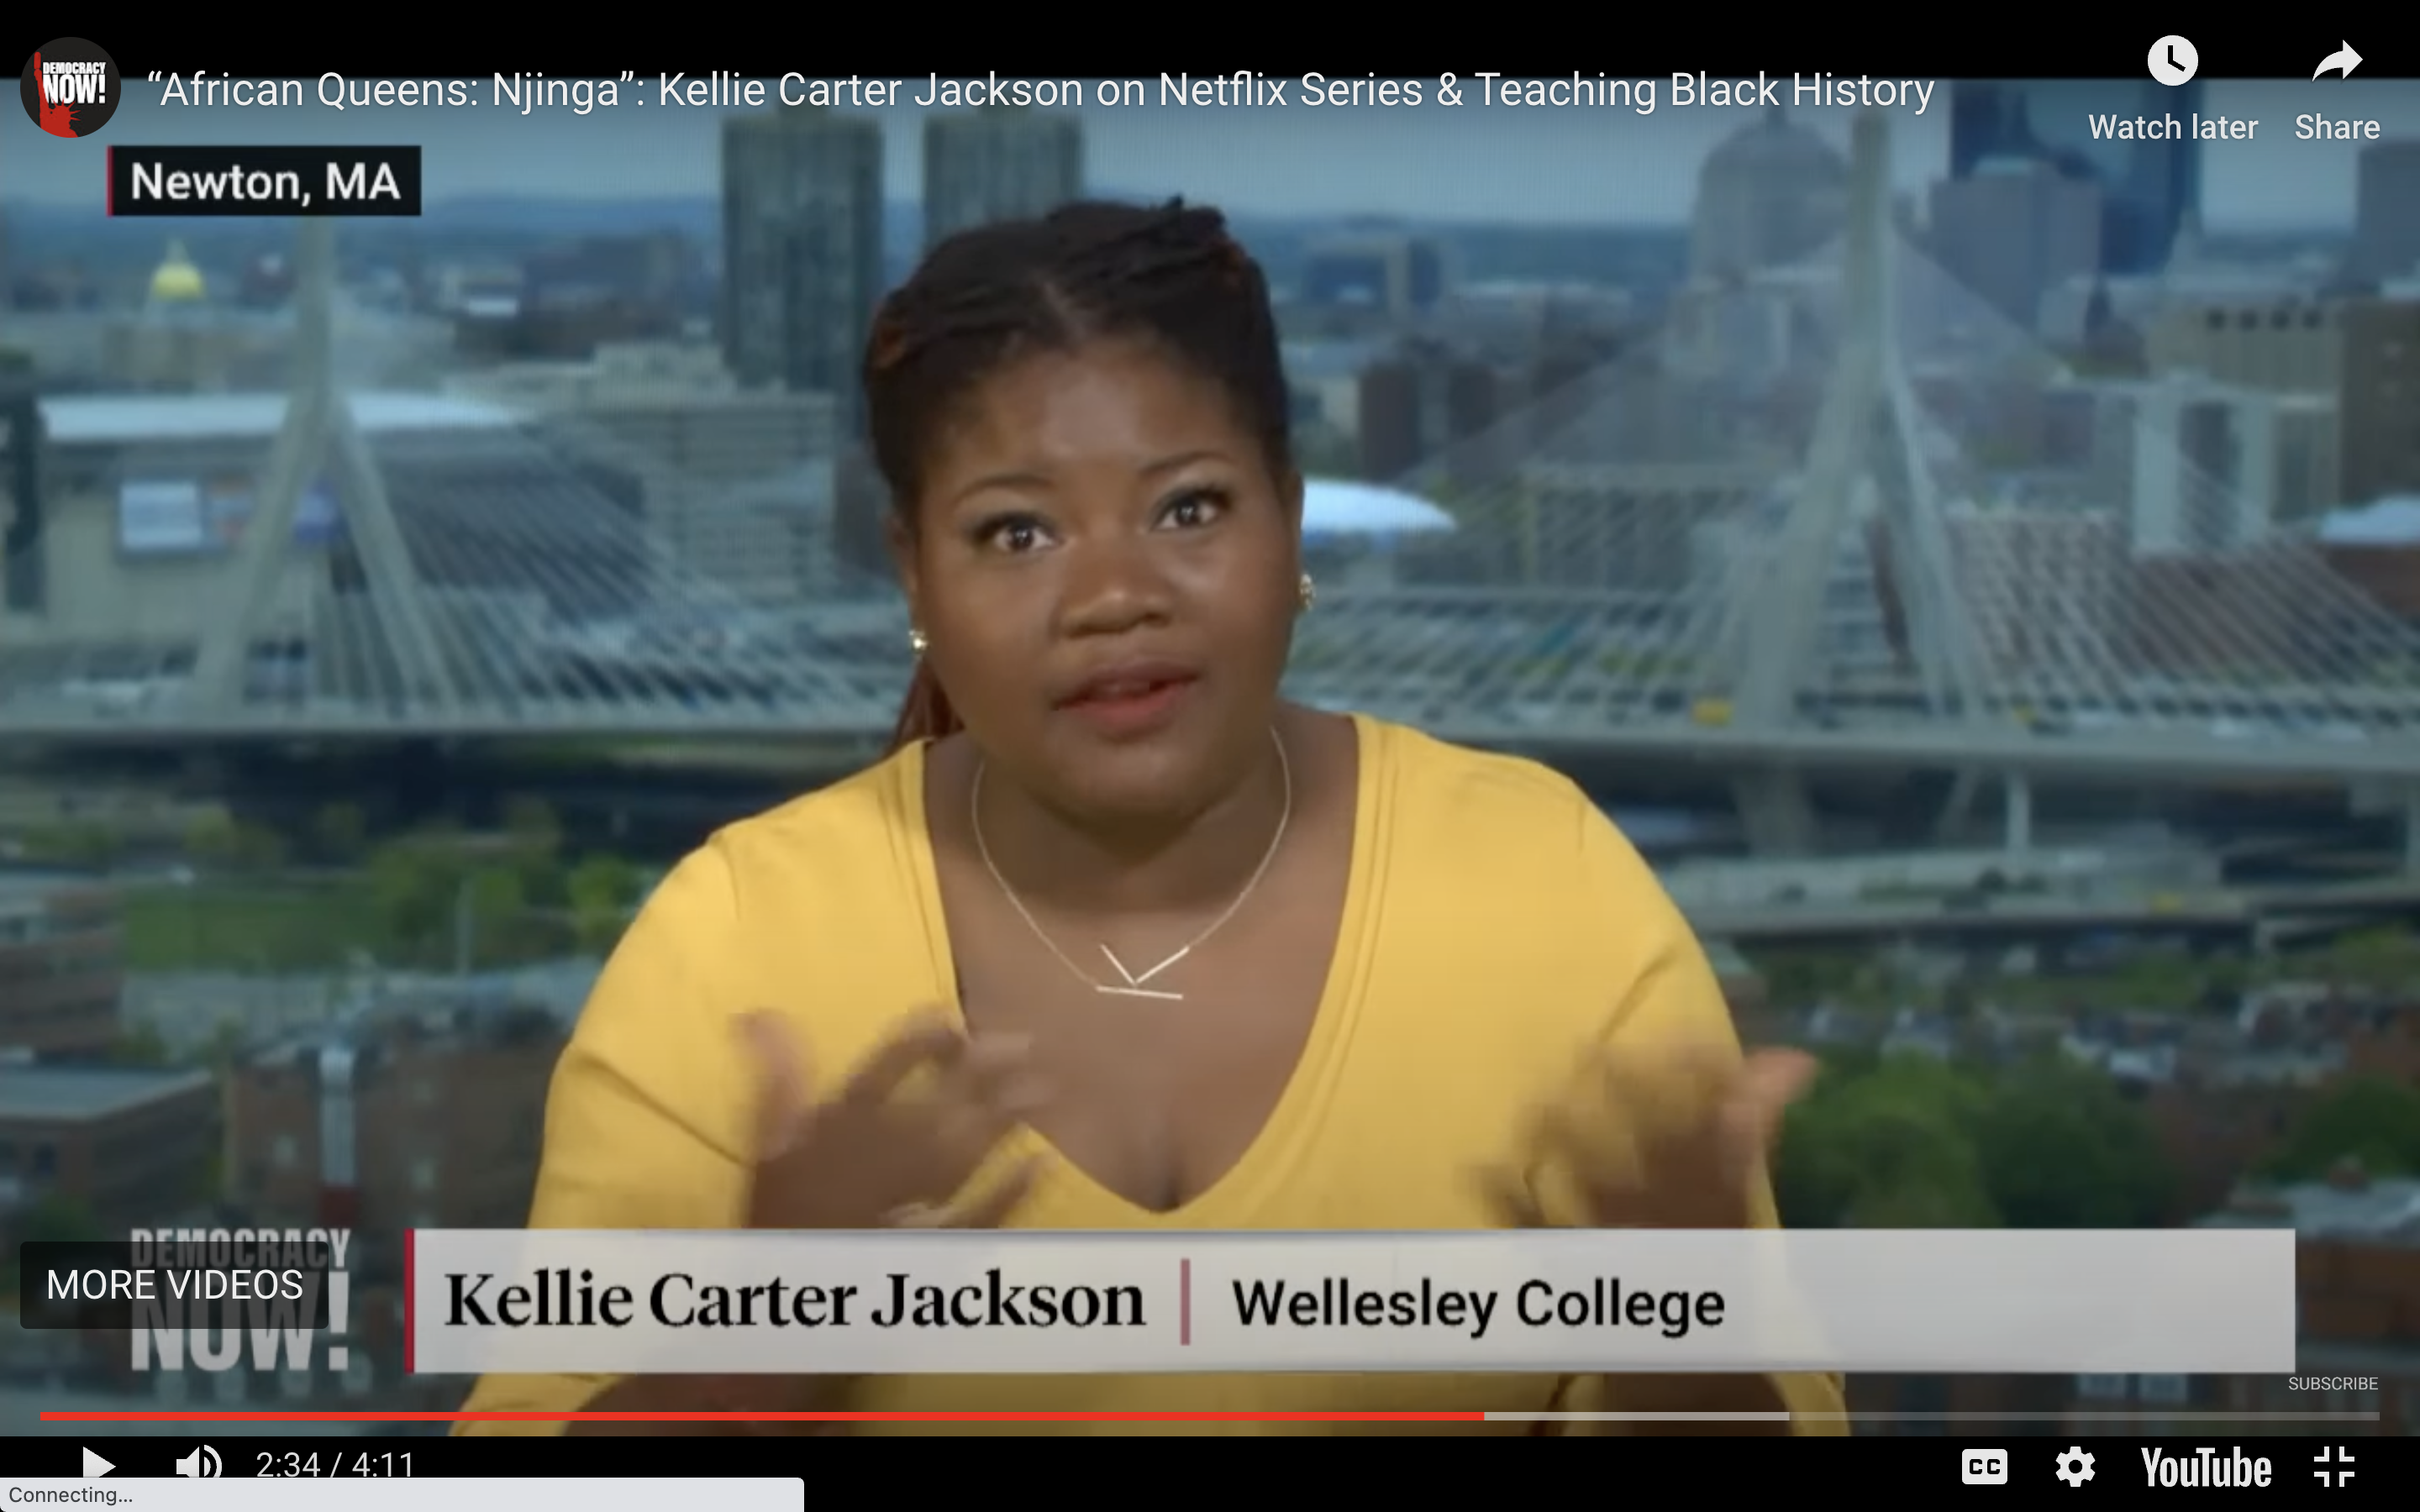 Kellie Carter Jackson being interviewed on Democracy Now! television show.